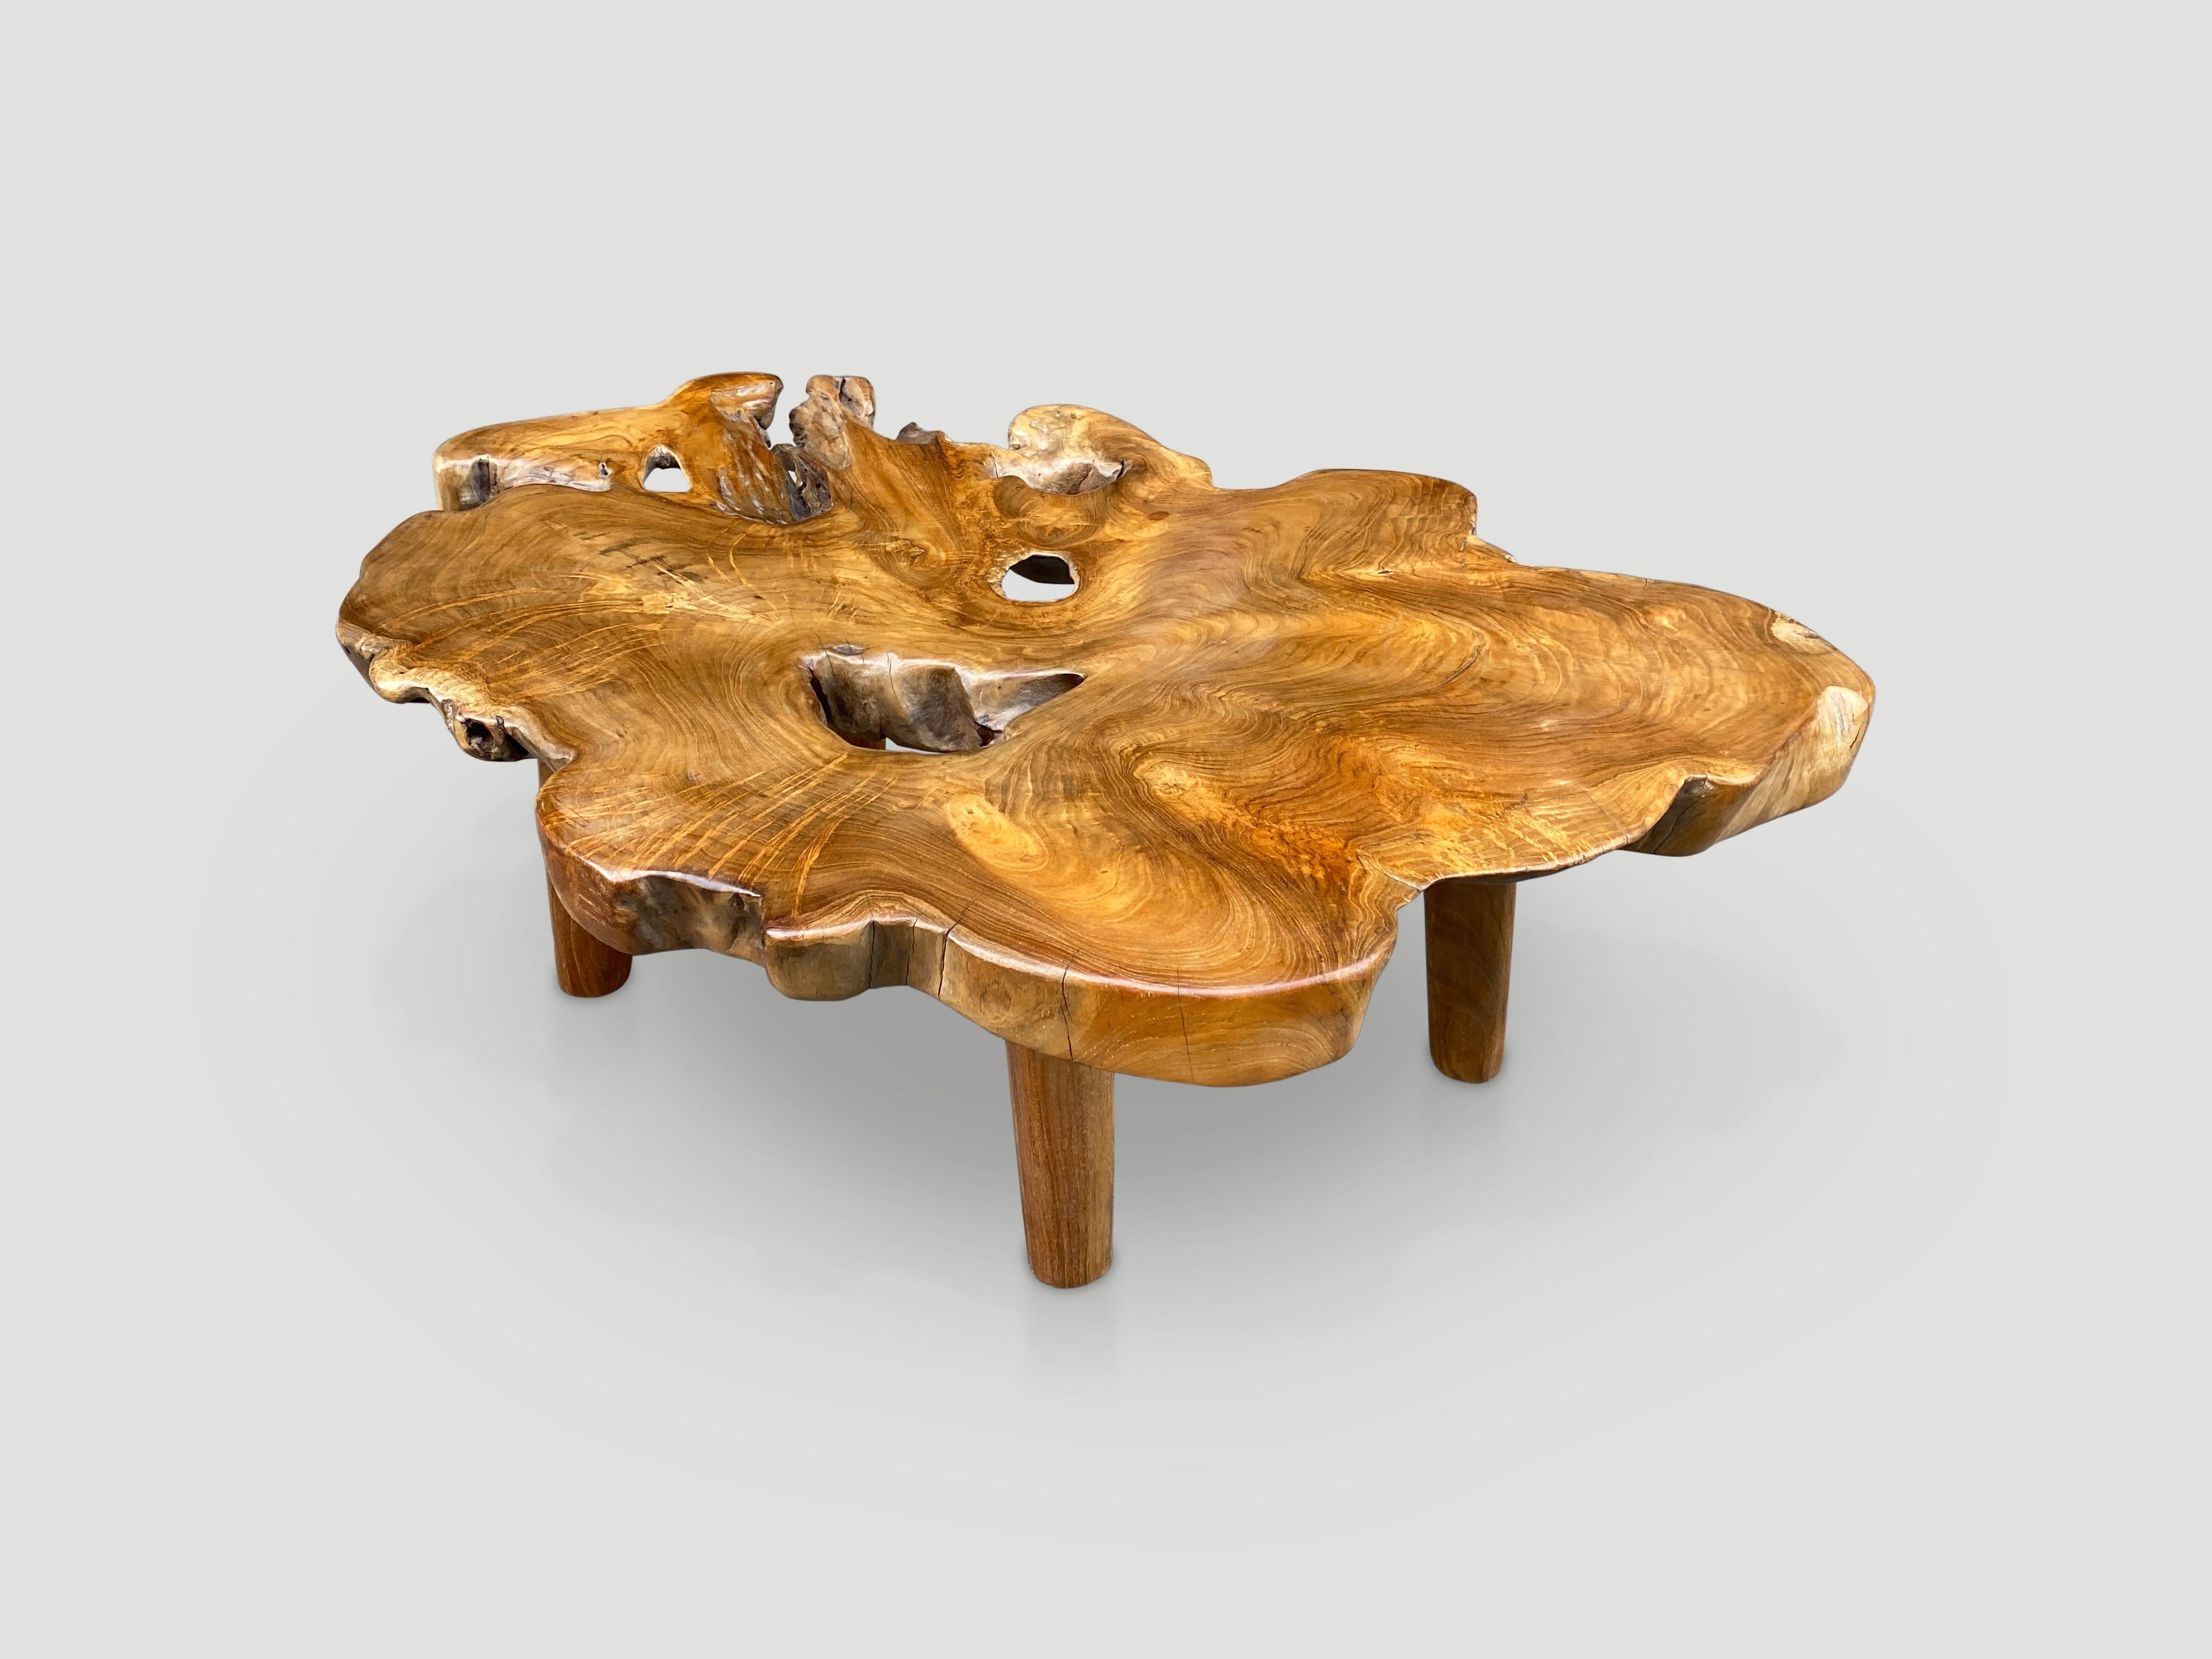 Single two and a half inch slab live edge teak coffee table. This beautiful shape is set on minimalist legs. Finished with a natural oil revealing the beautiful wood grain.

Own an Andrianna Shamaris original.

Andrianna Shamaris. The Leader In